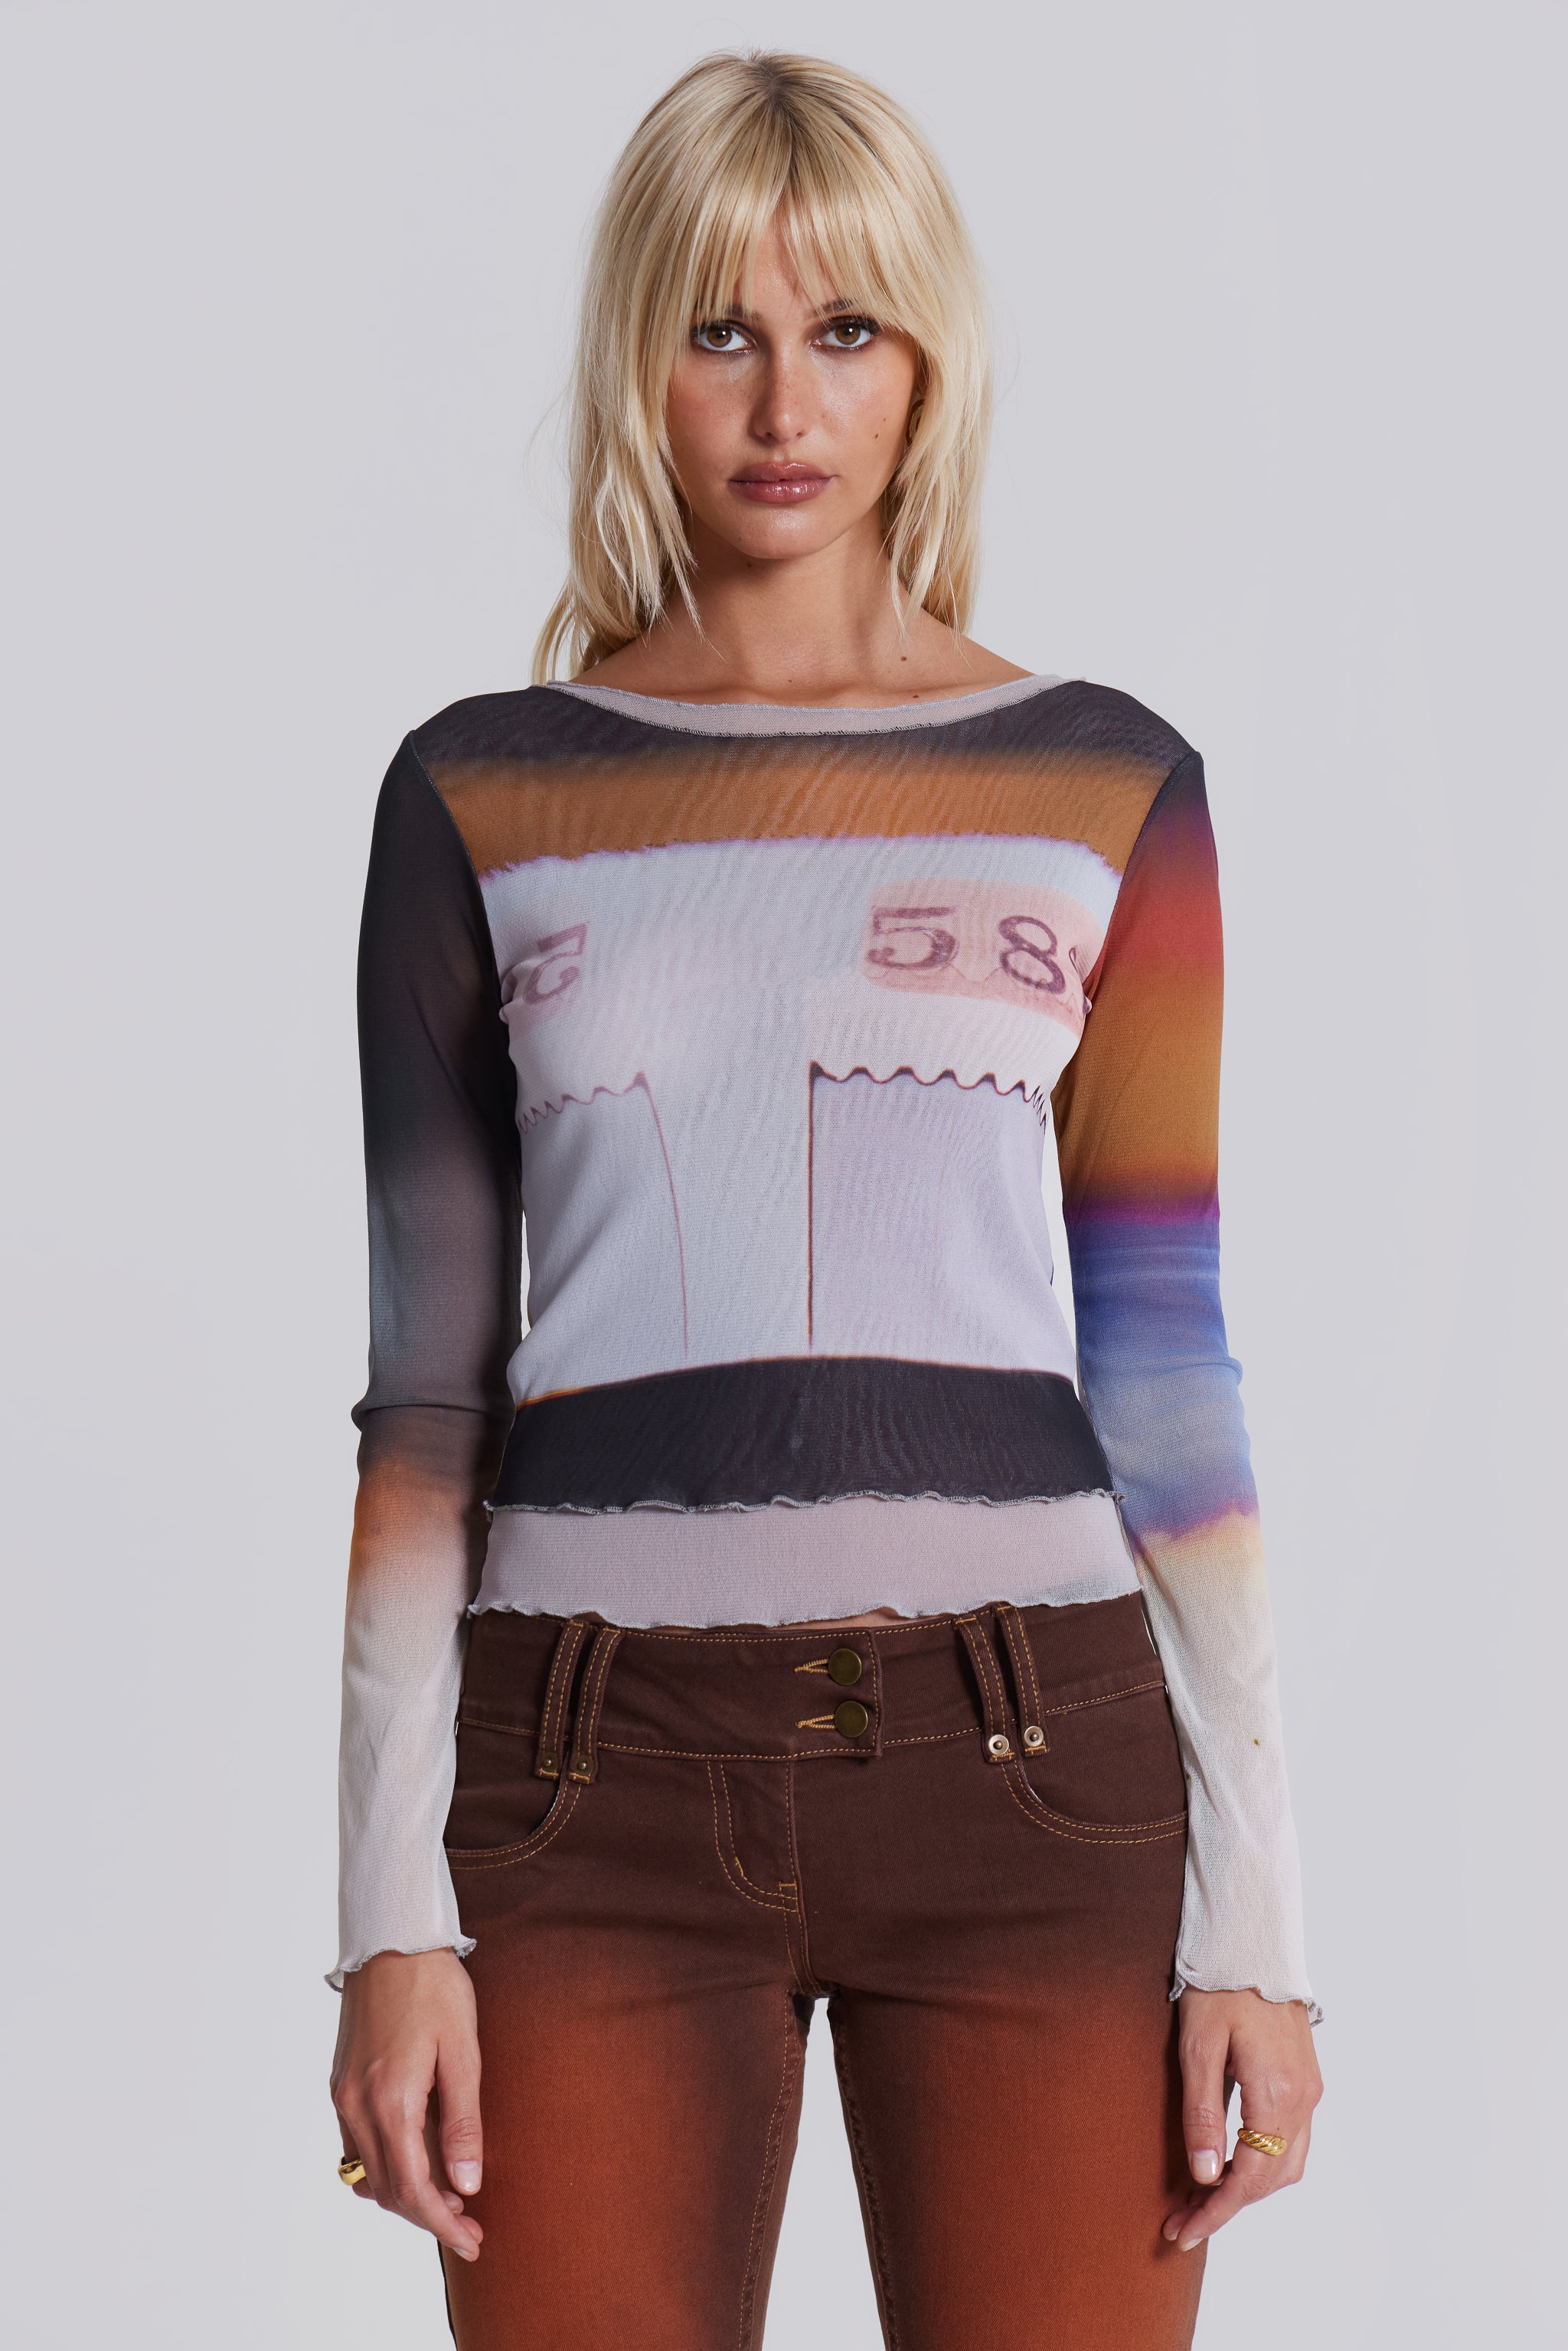 Looking for a pattern like this!! (Top from Jaded London) I tried search  for mesh knit top but all i can find are more grown up patterns. Or any  advice on how